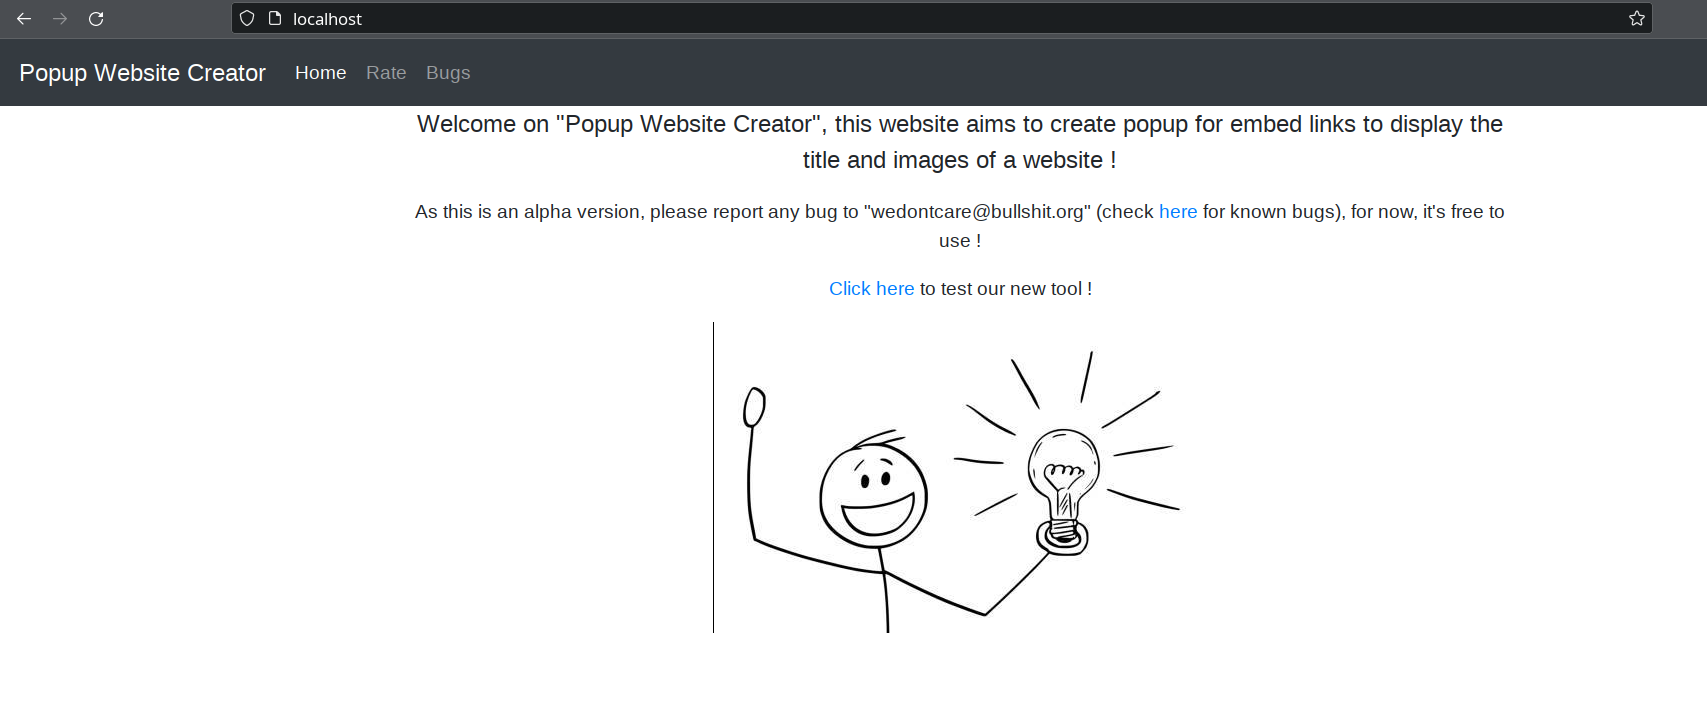 Popup Creator home page